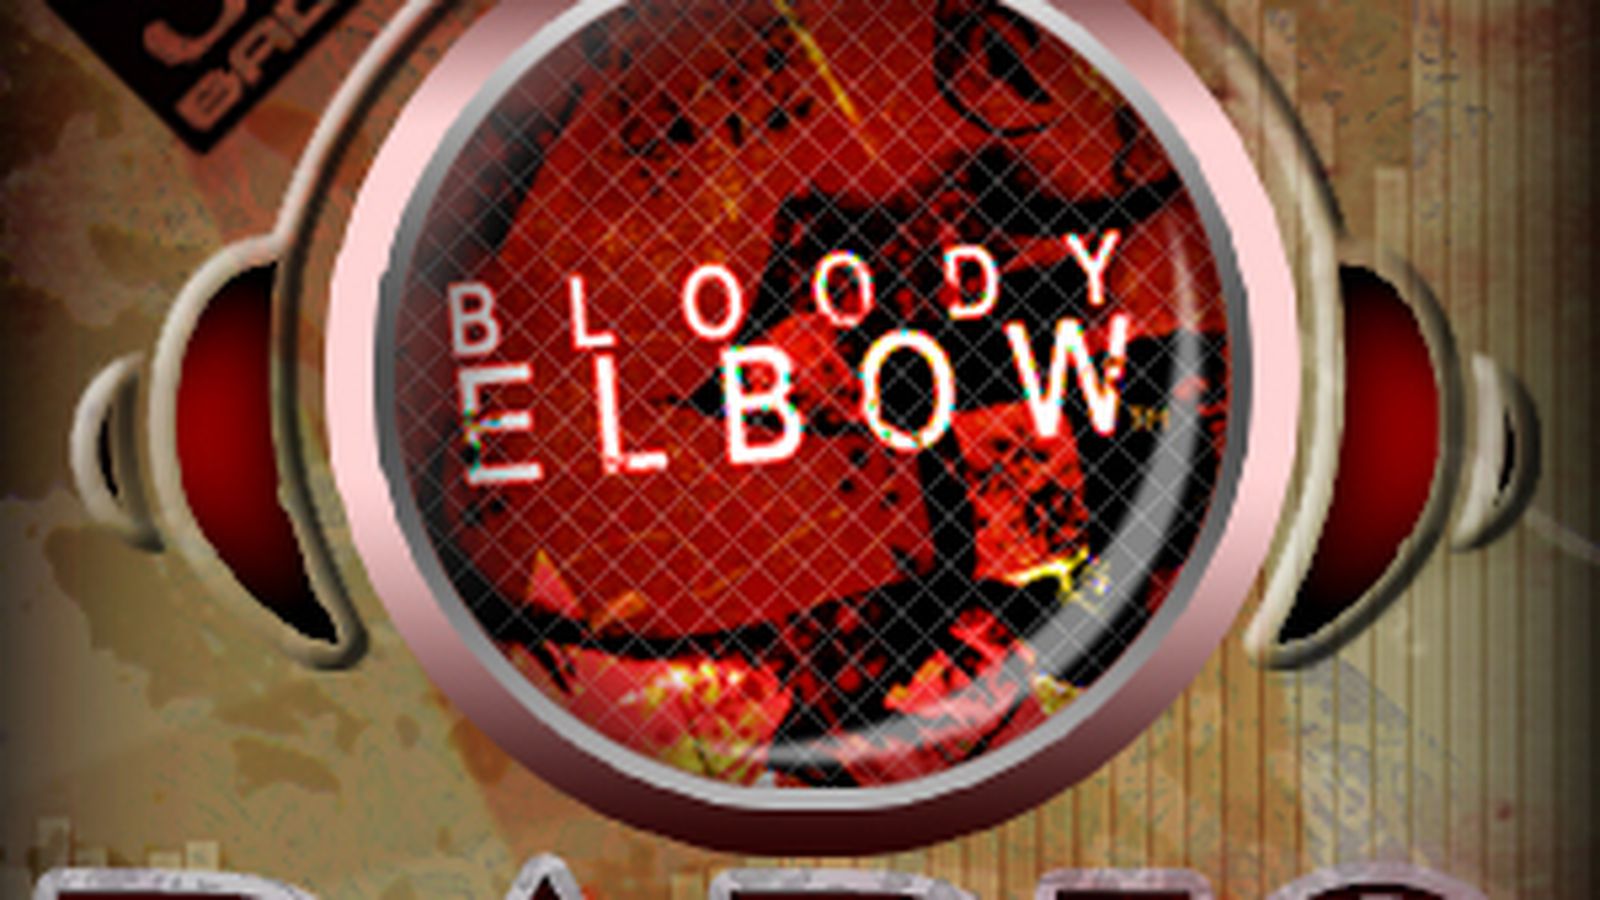 Bloody Elbow